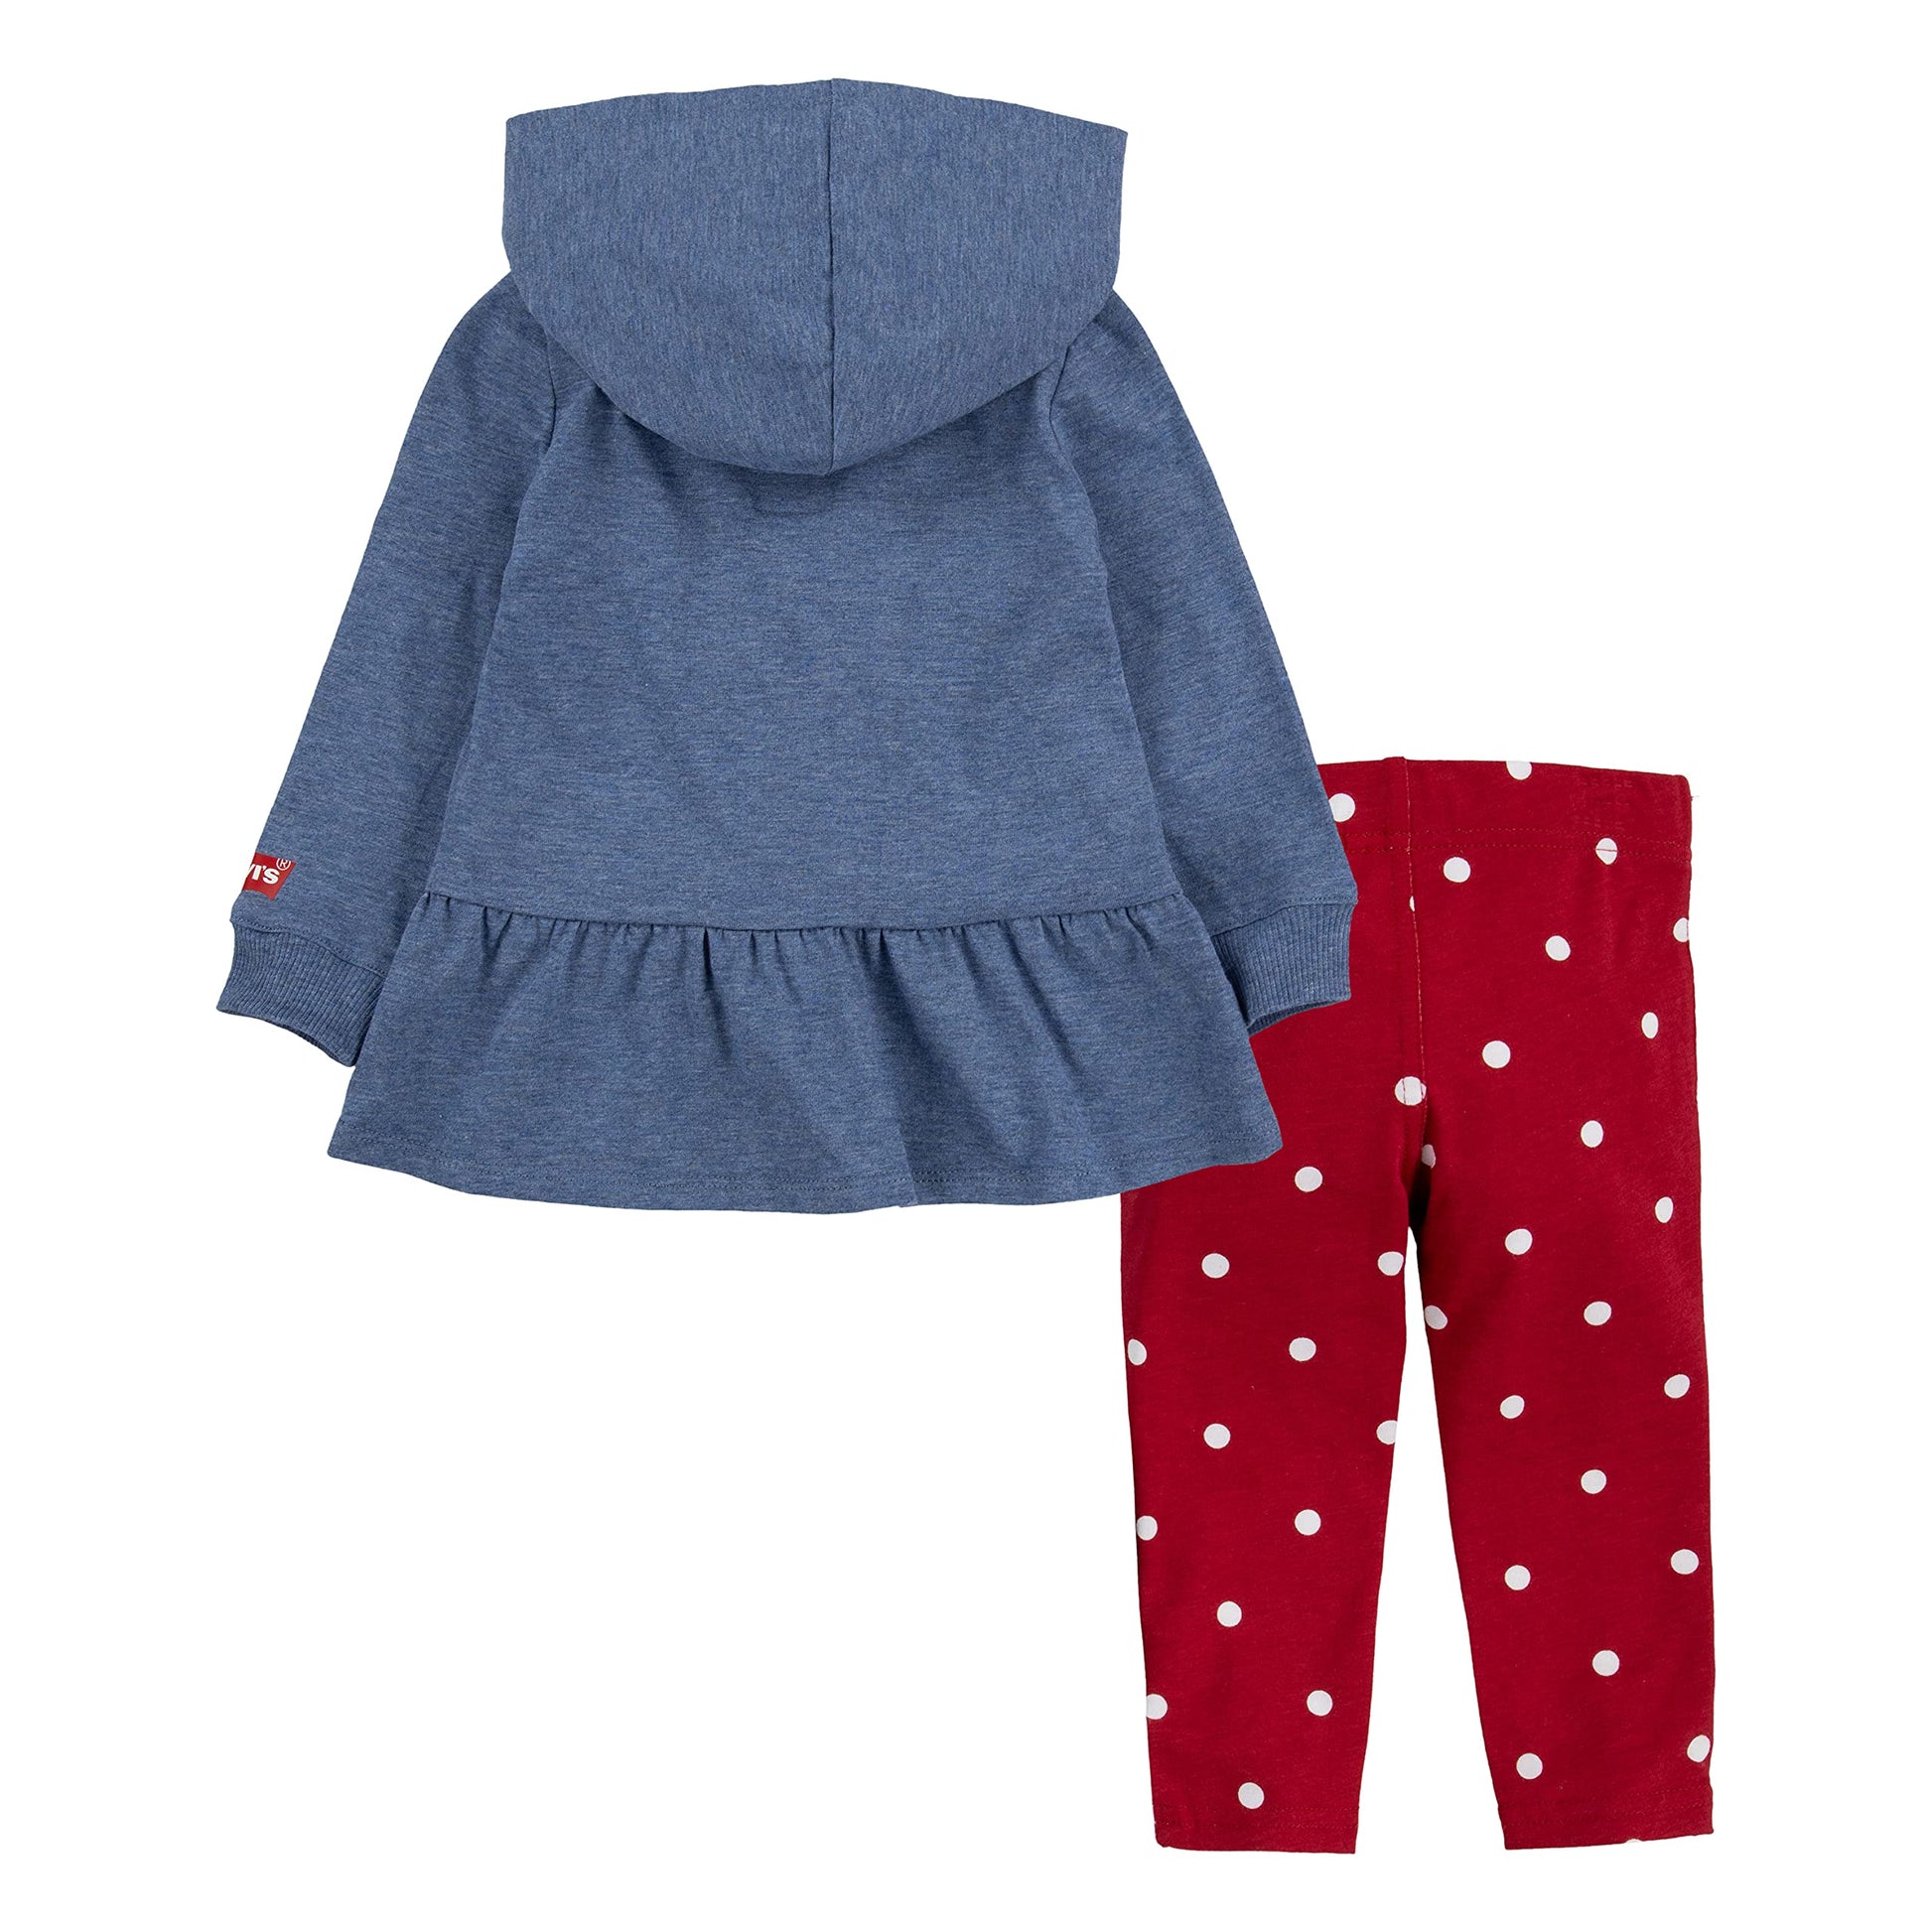 Image 2 of Levi's x Disney Minnie Mouse Hoodie and Leggings Set (Toddler)